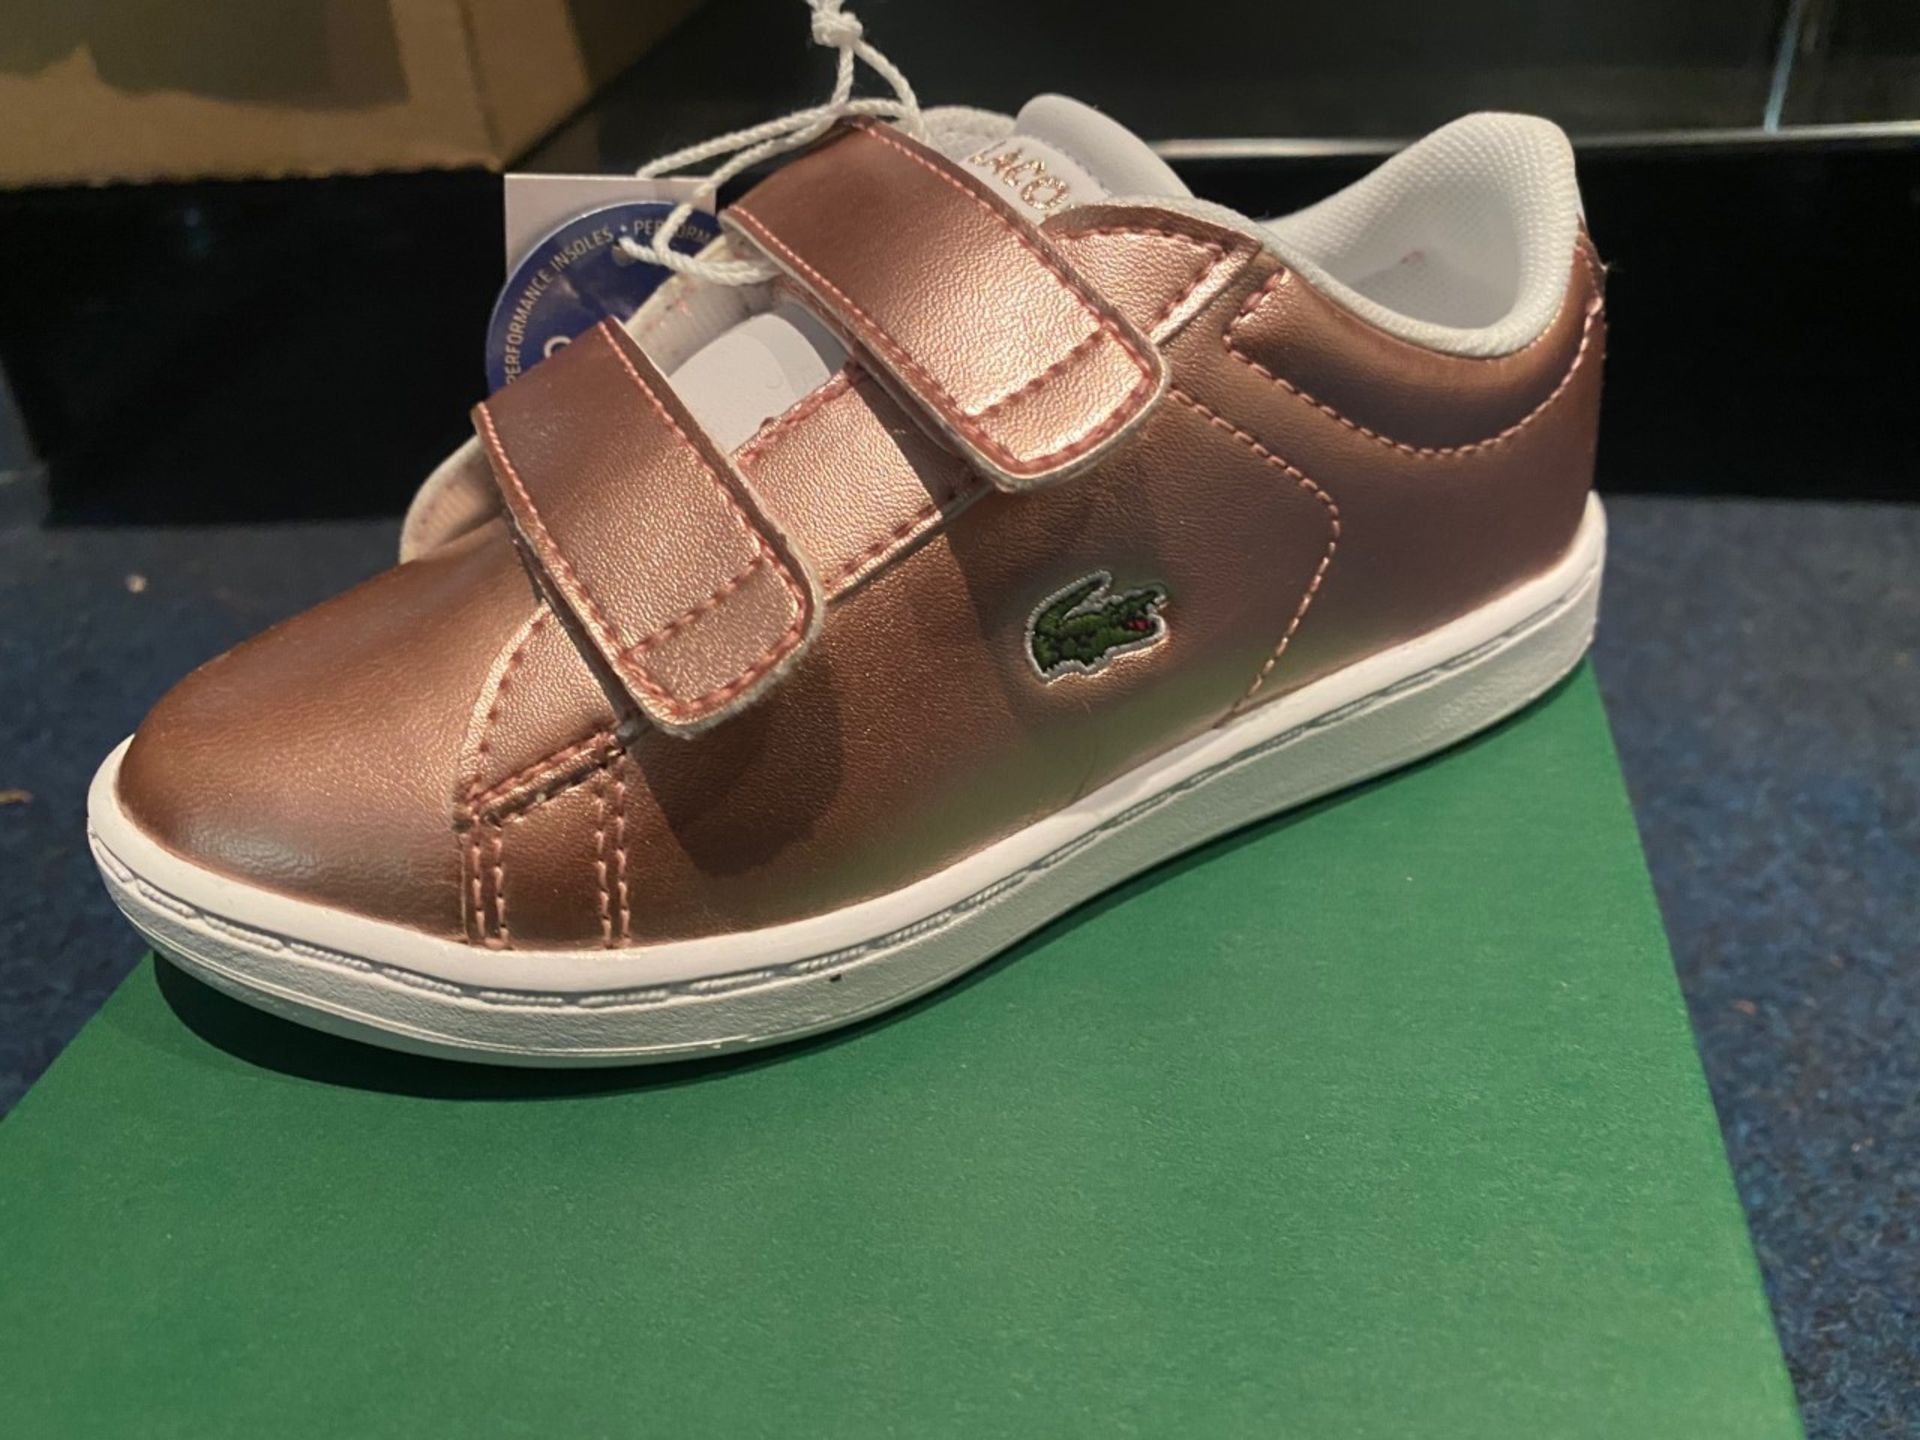 NEW & BOXED LACOSTE ROSE GOLD TRAINERS SIZE INFANT 9